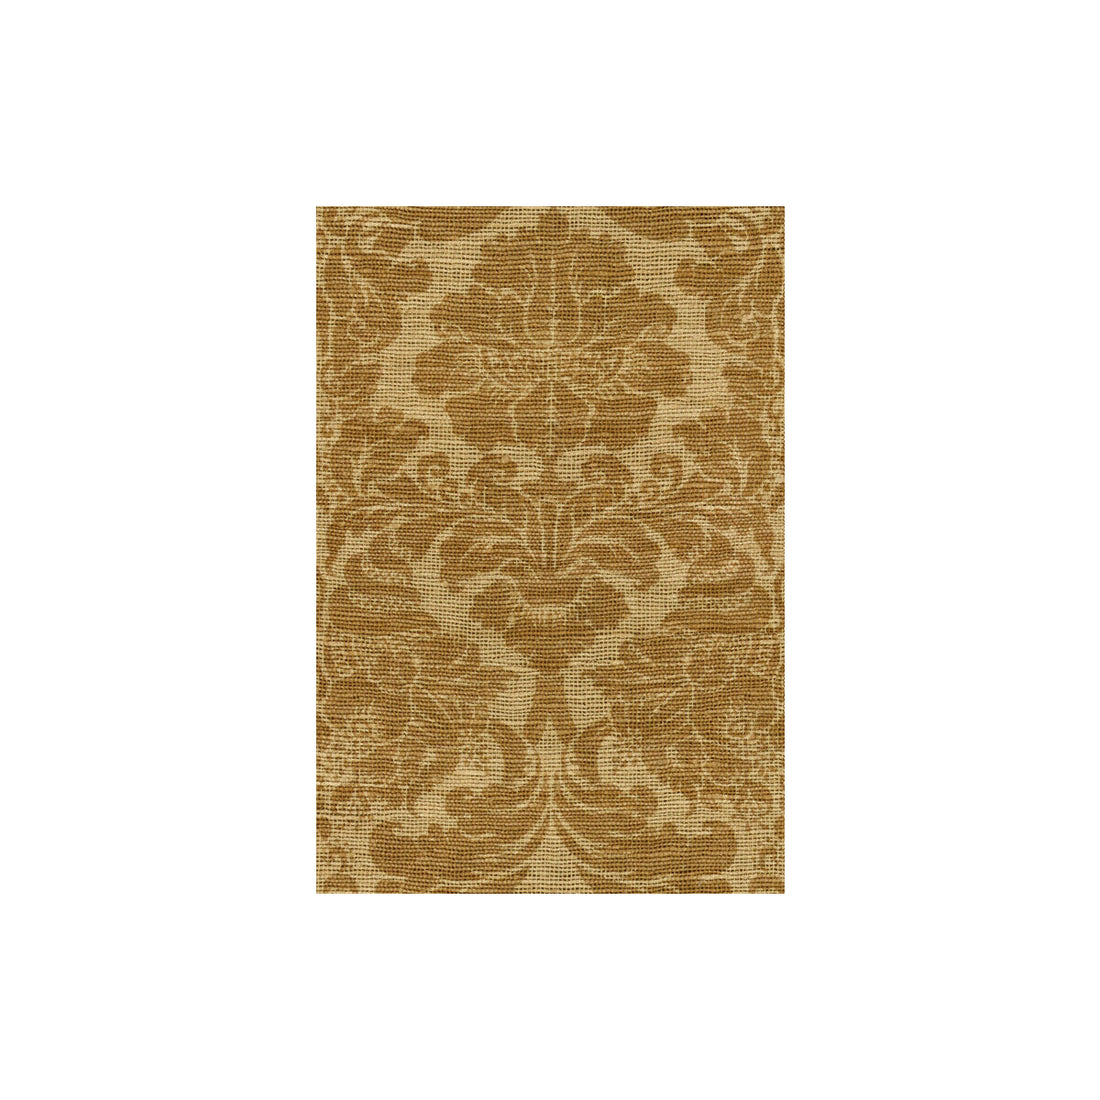 Bangla Damask fabric in straw color - pattern 3816.616.0 - by Kravet Design in the Barclay Butera II collection